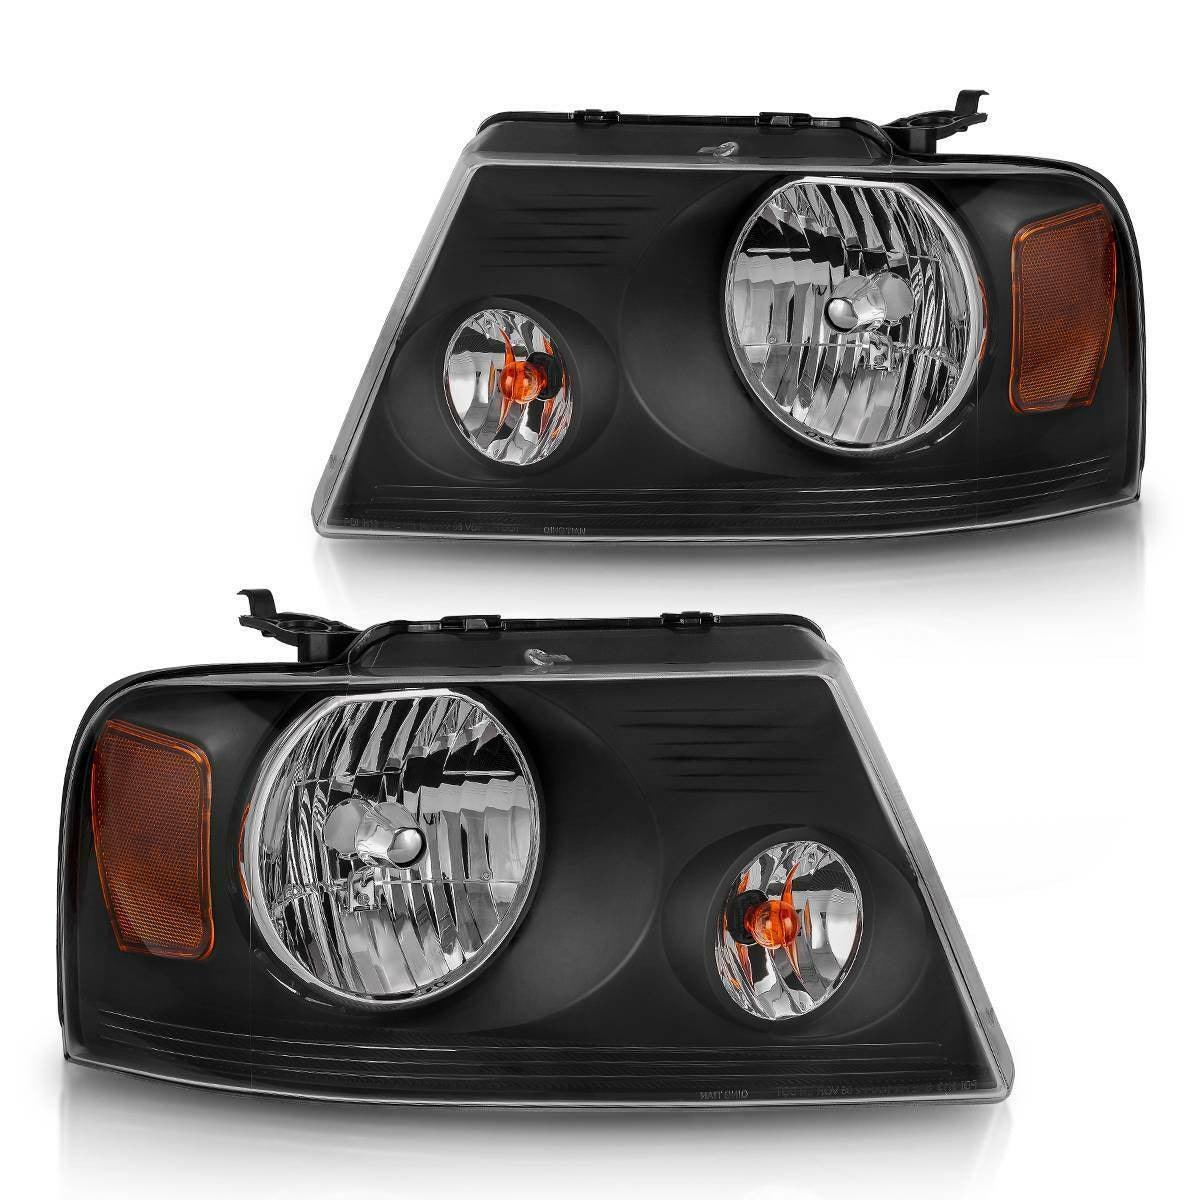 Compatible with Lincoln Mark LT 06 2007 2008 Partsam Headlight Assembly Replacement for Ford F150 04 05 06 07 08 Pickup Driver and Passenger Side Pair Headlamps Amber Reflector FO2502201 FO2503201 